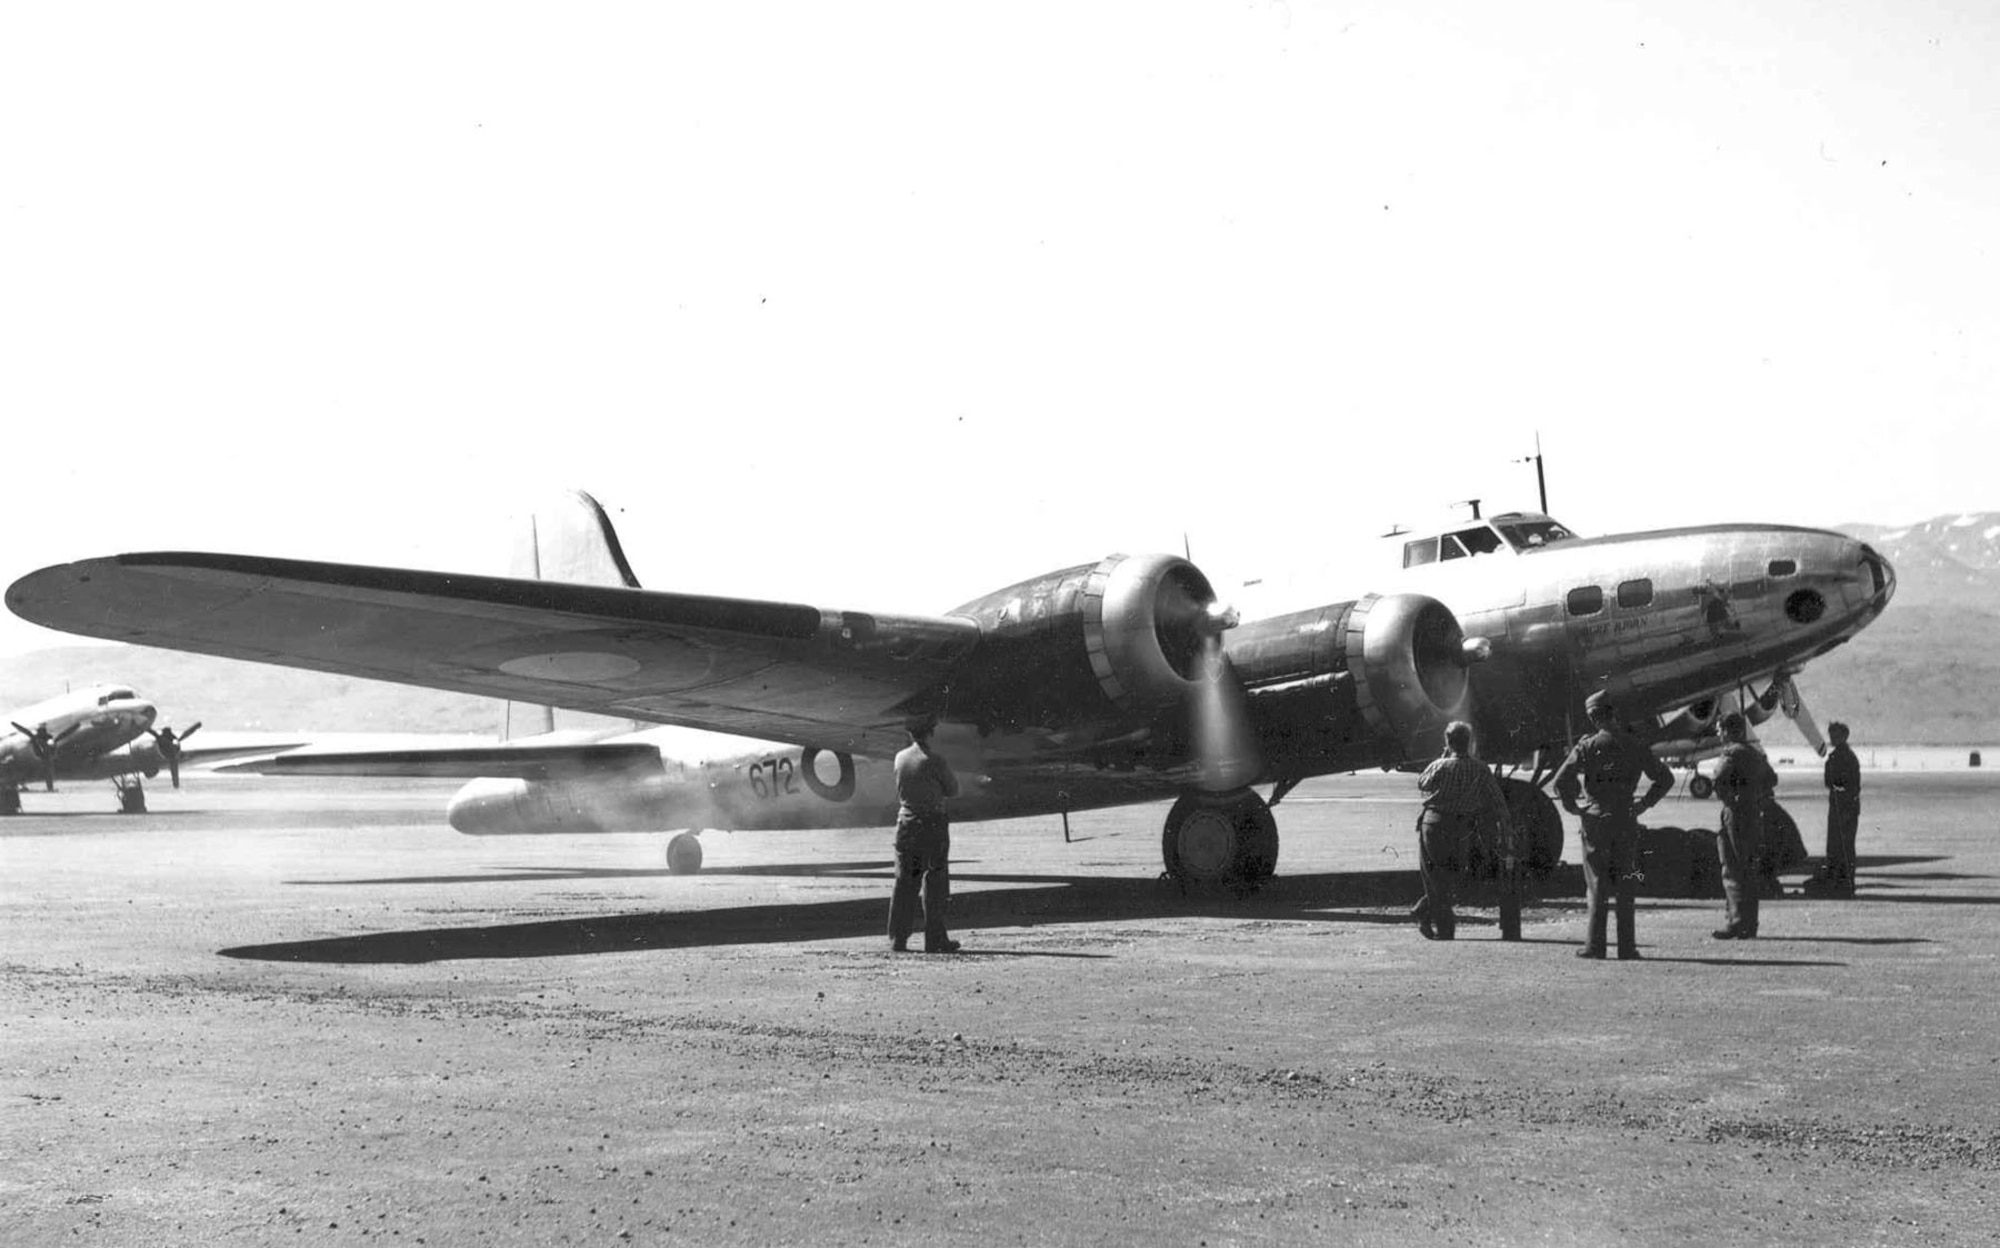 Boeing B-17G "Shoo Shoo Shoo Baby."  The aircraft carried the name "Store Bjorn" while in service with Denmark. (U.S. Air Force photo)